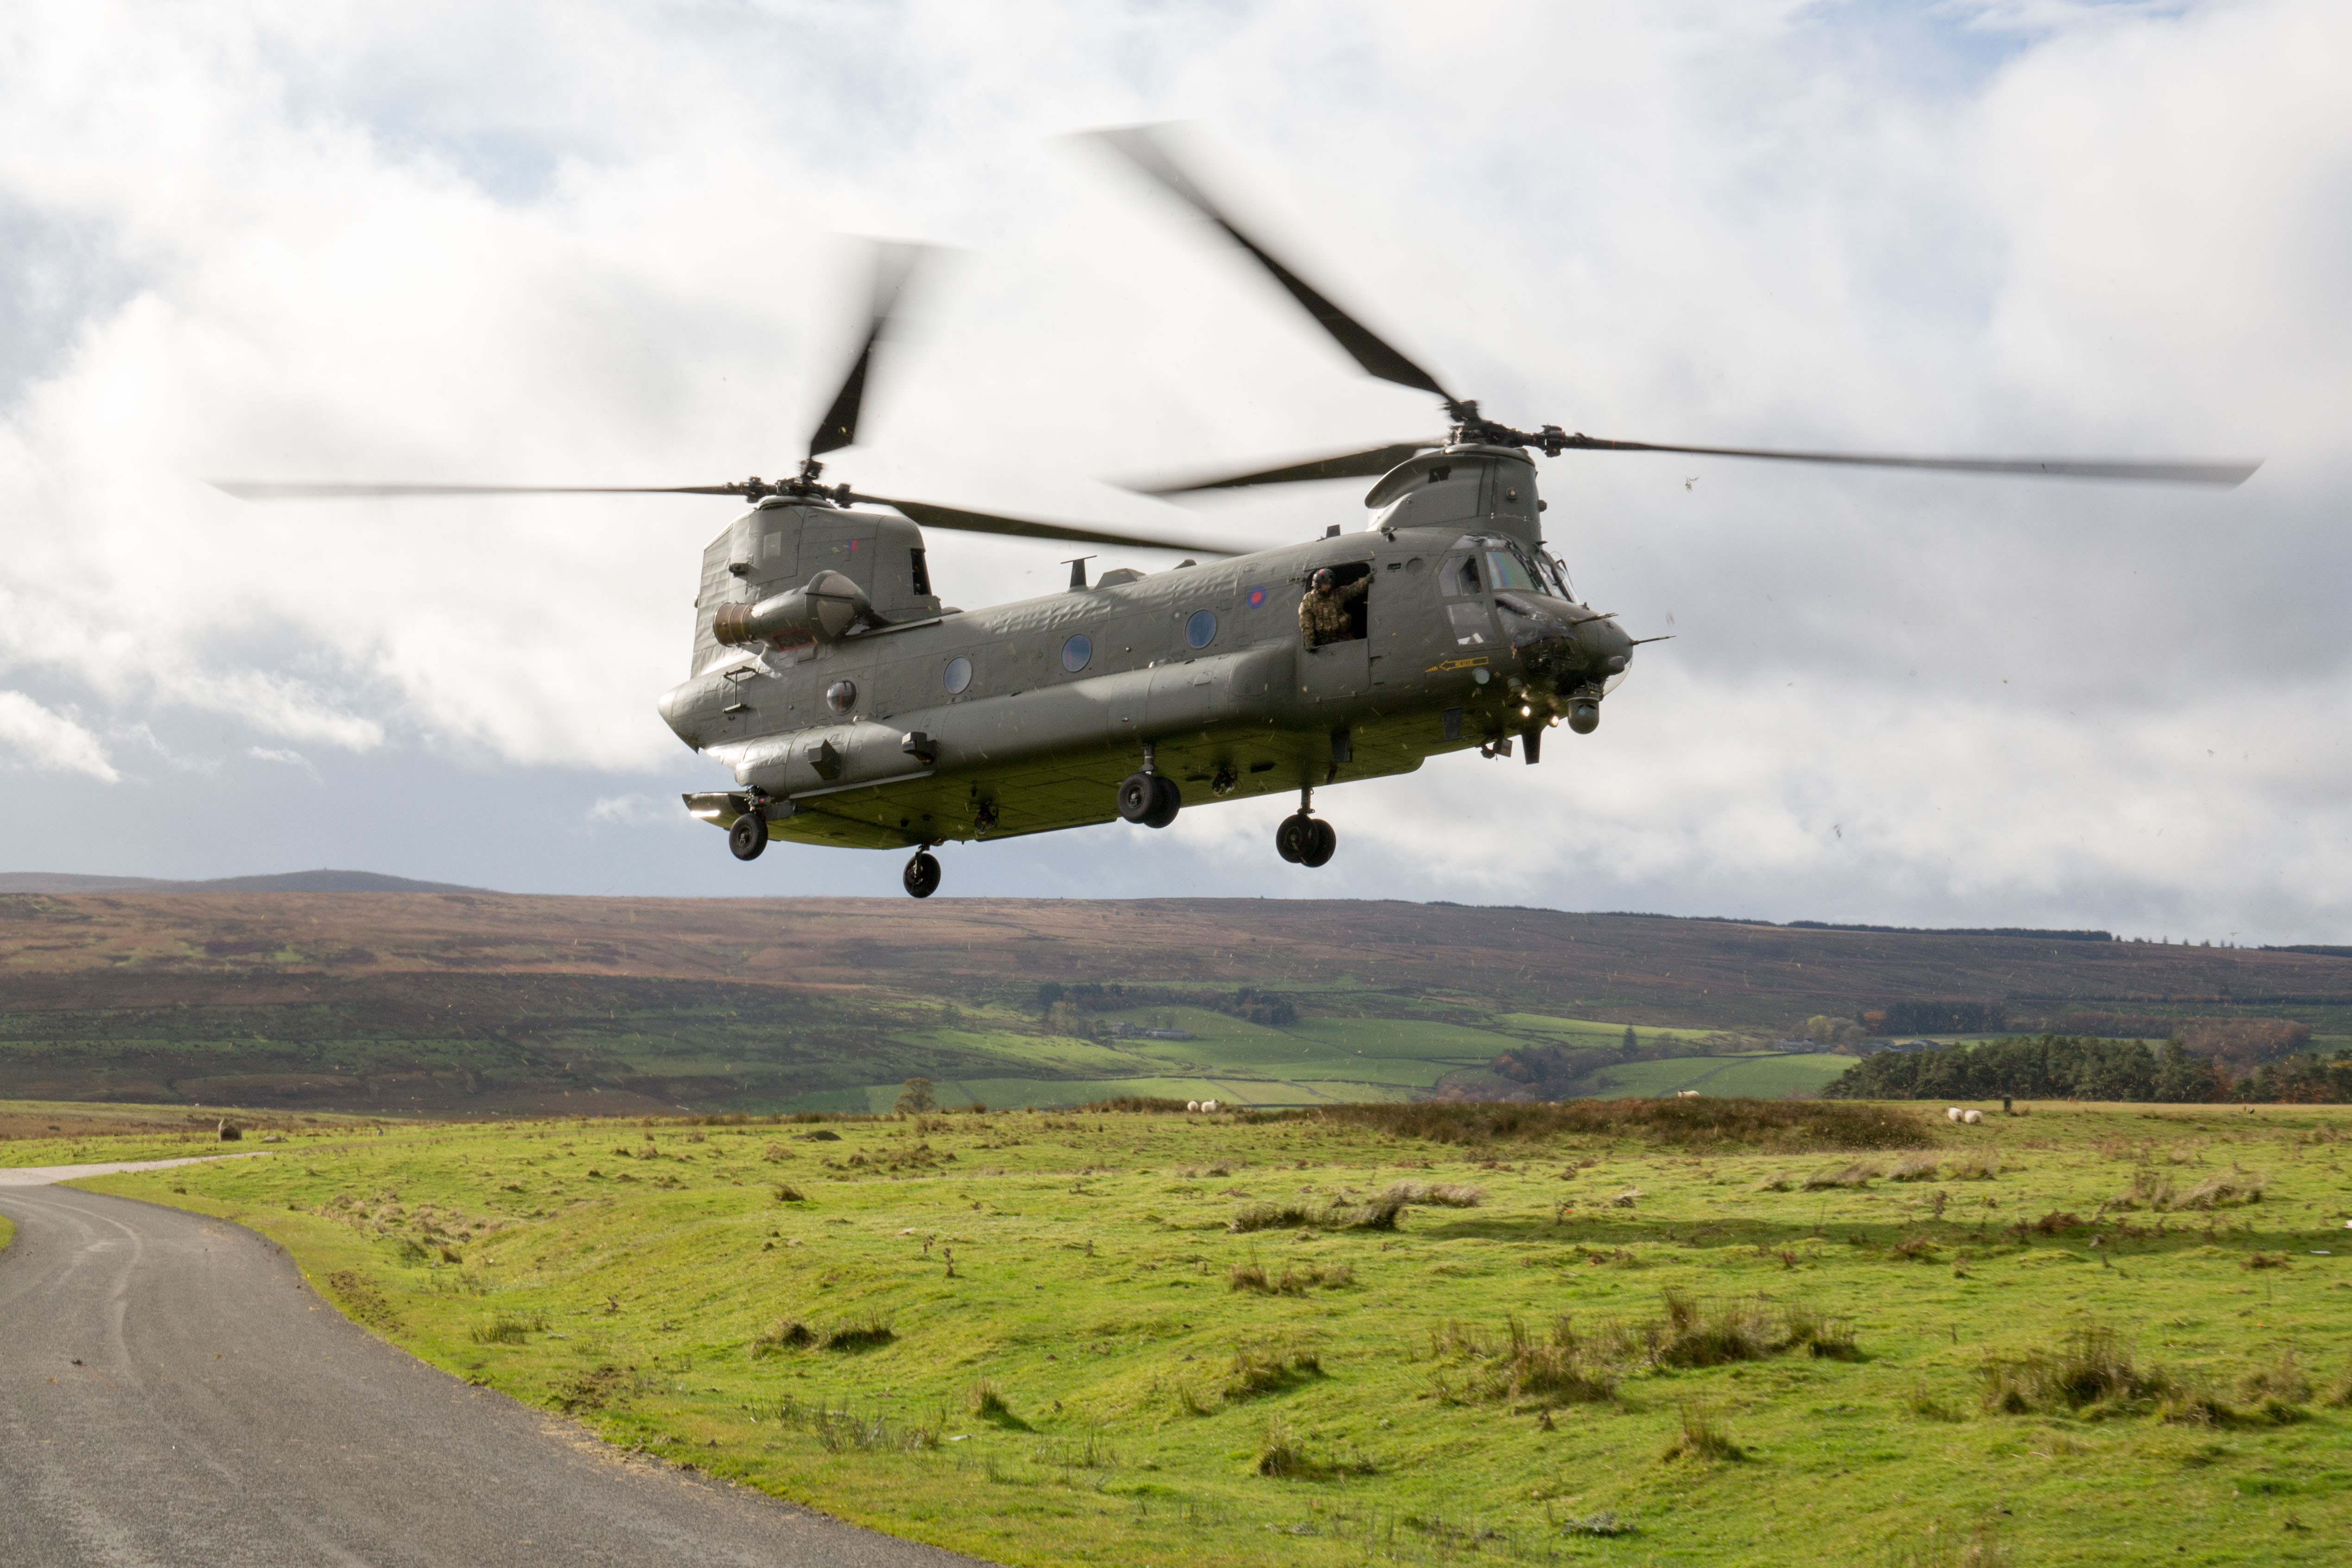 Image shows an RAF Chinook helicopter flying.